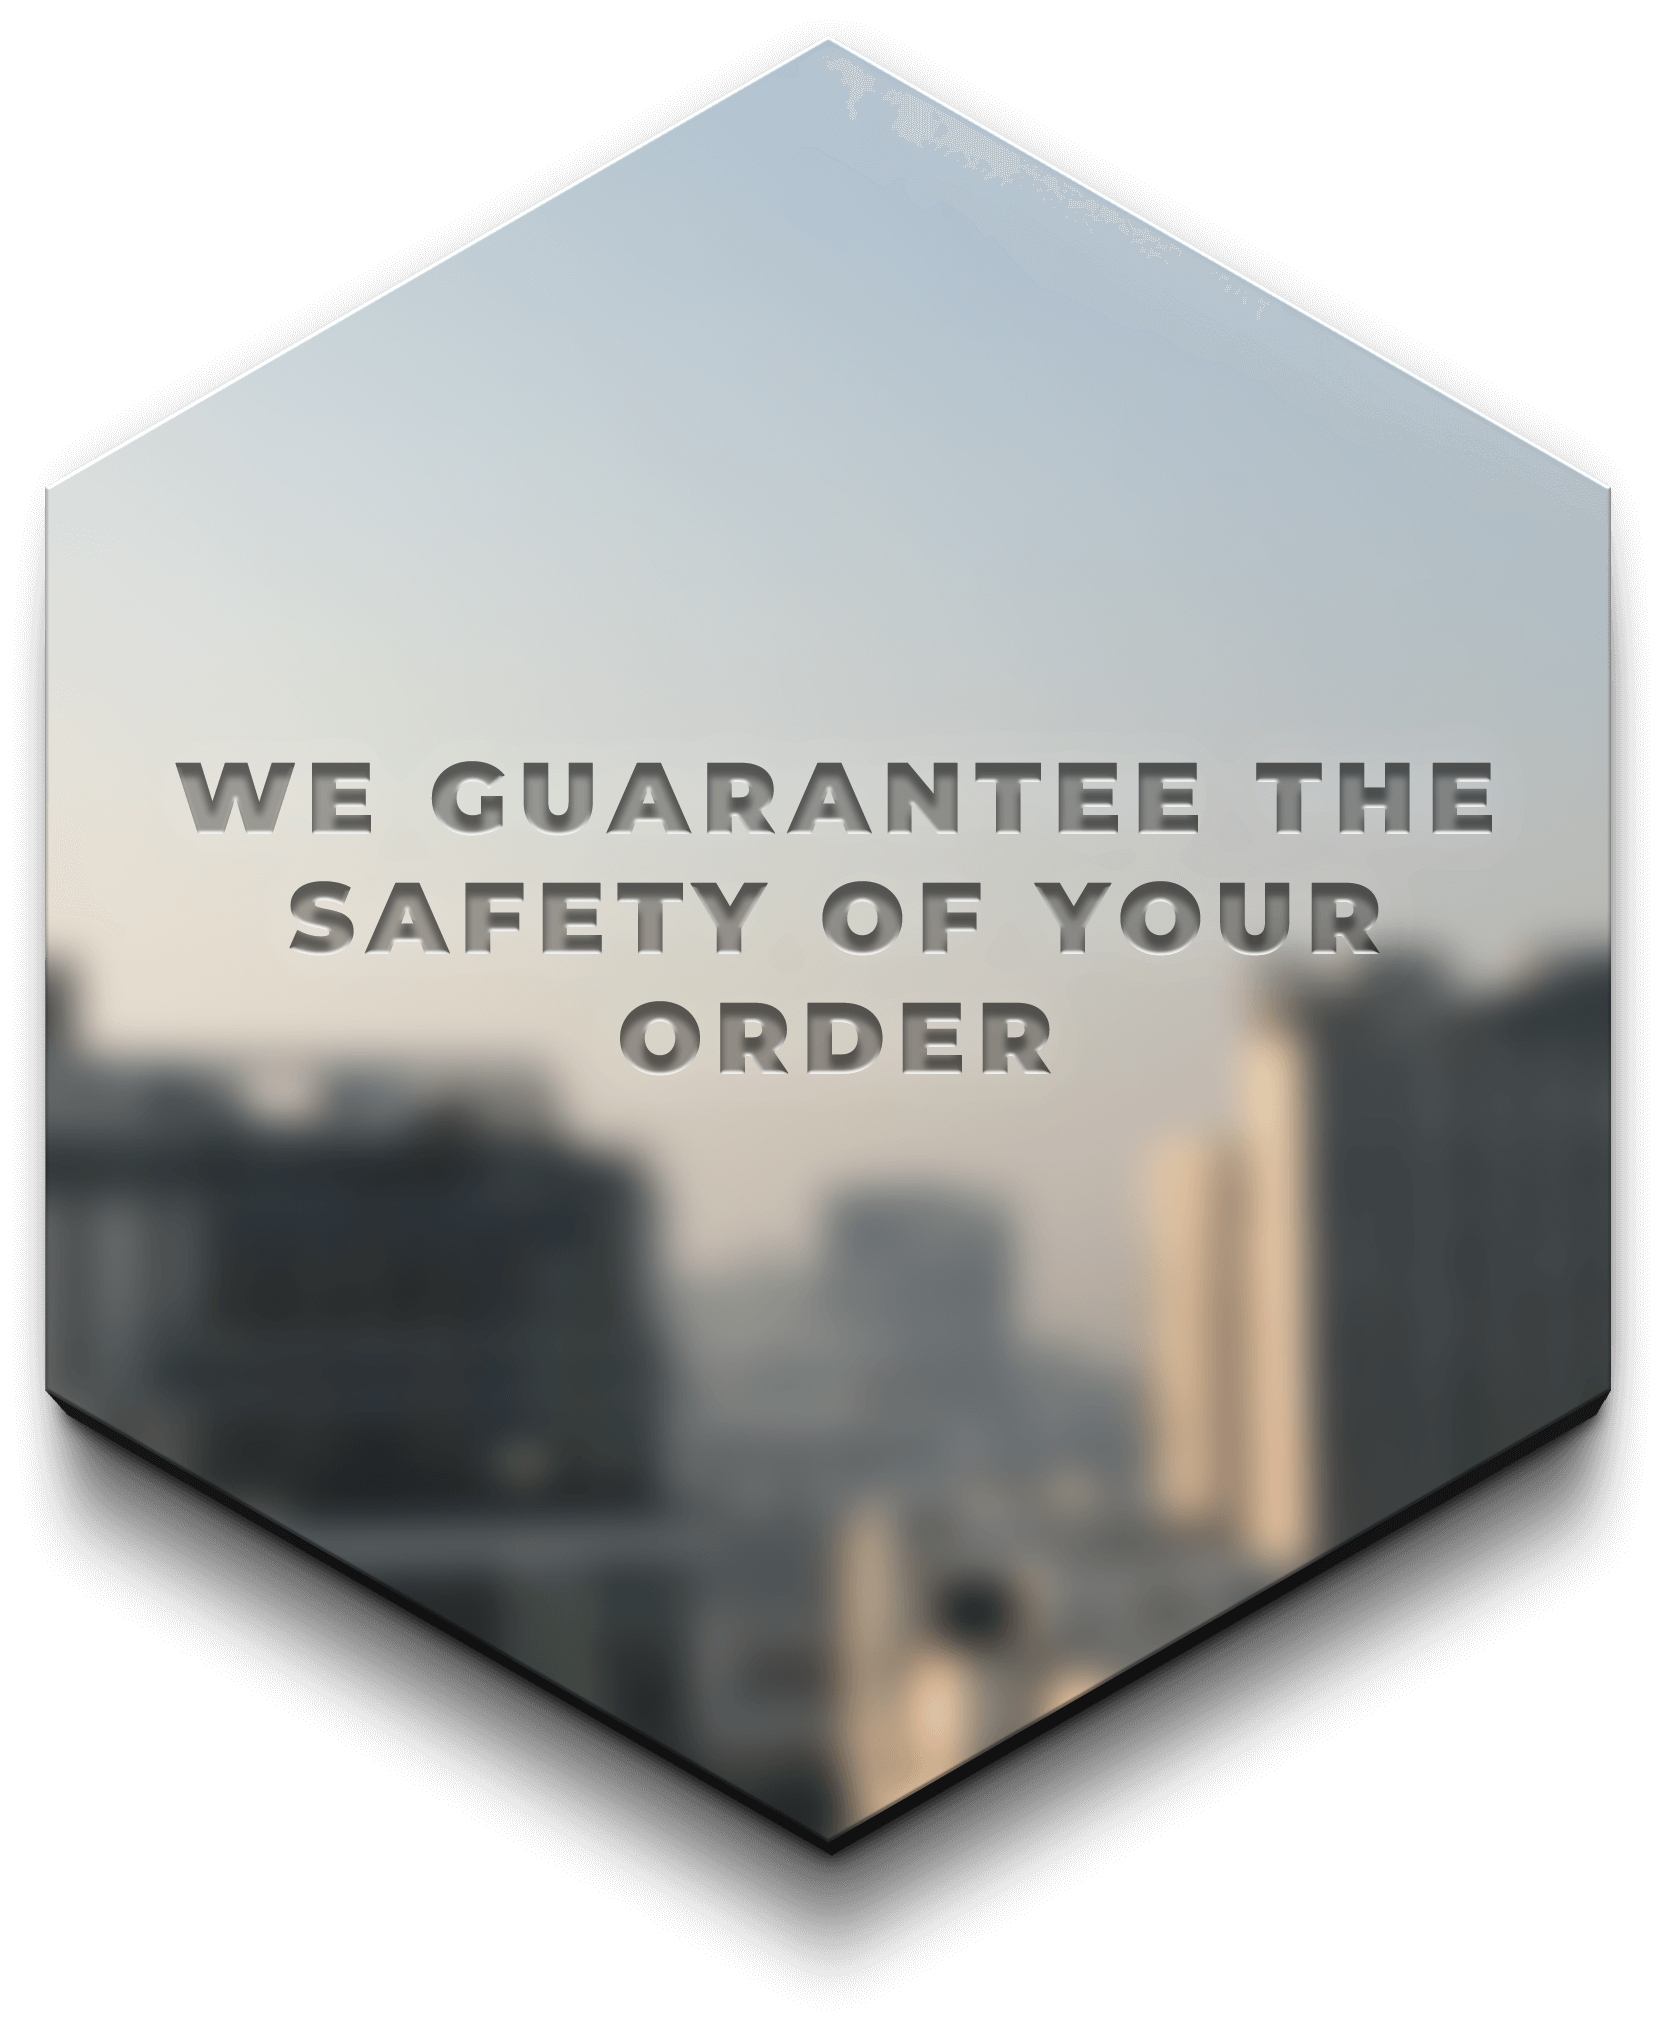 We guarantee the safety of your order